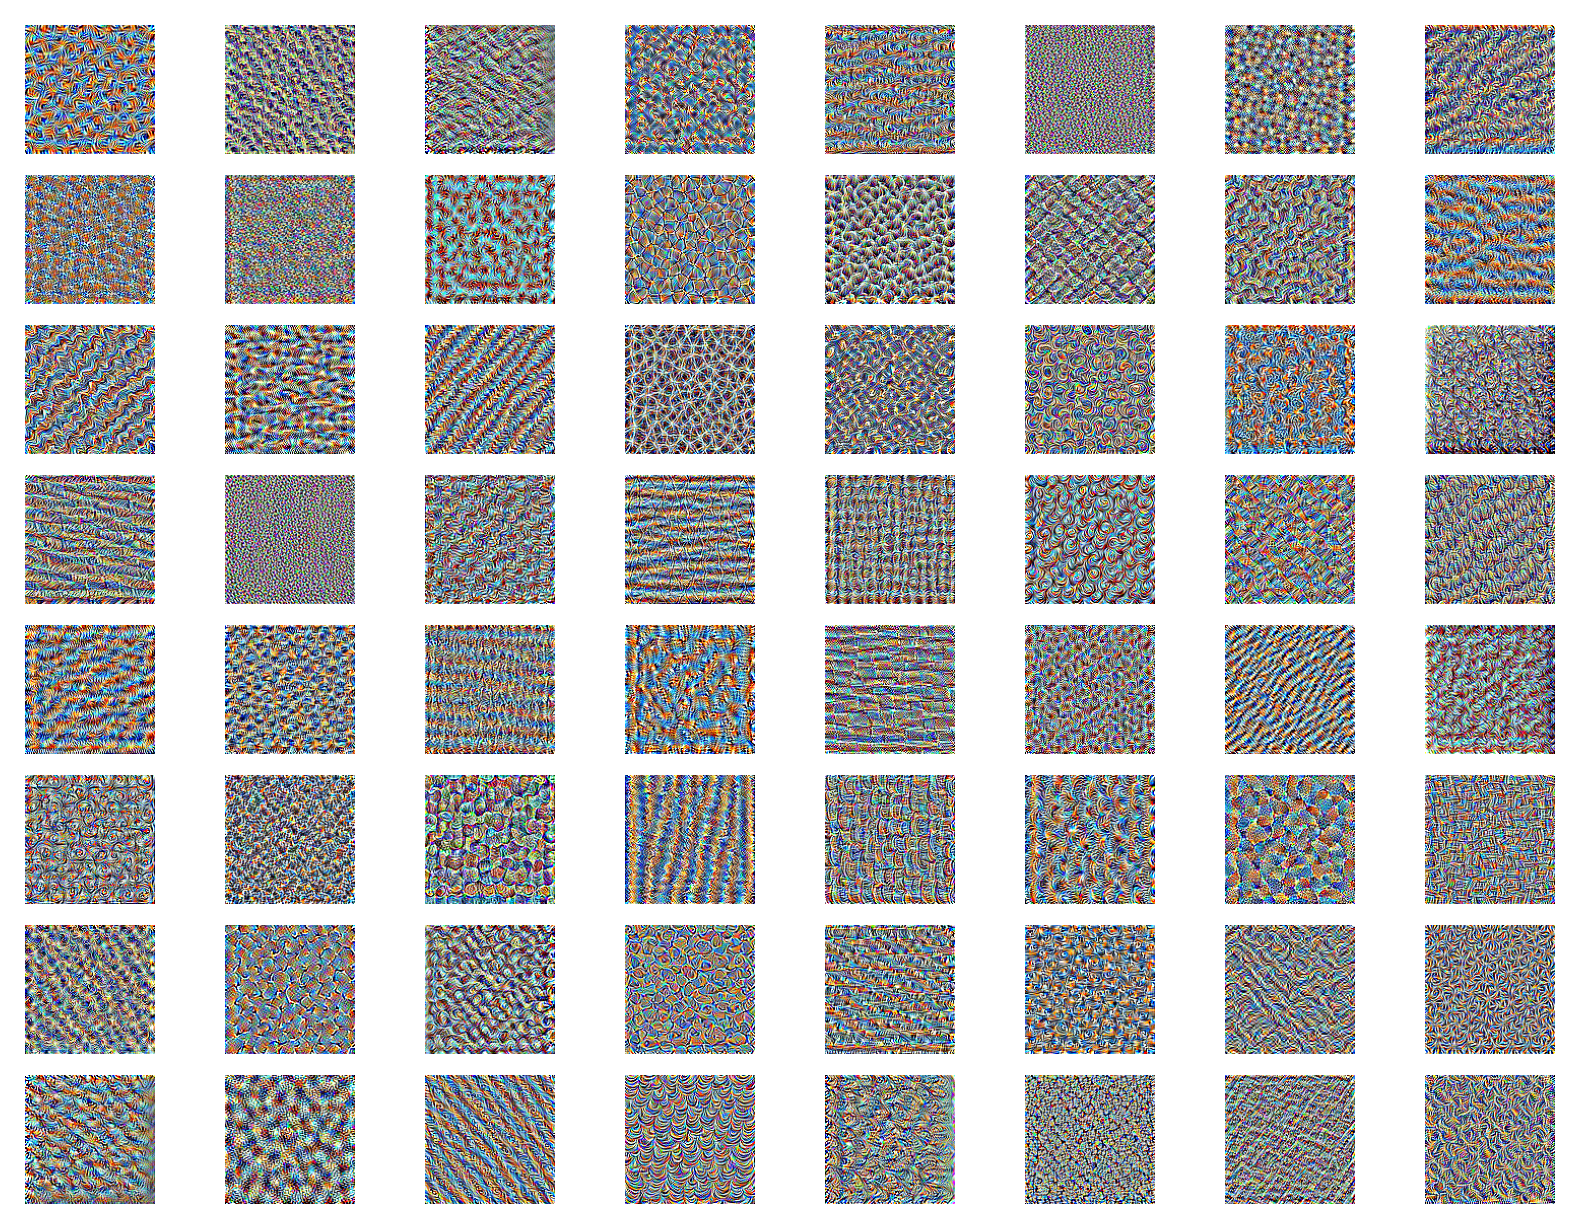 64 images showing various patterns caused by the feature extraction process. They include, coloured swirls, cross hatching, noise, semi-circles and webbing, to name a few.